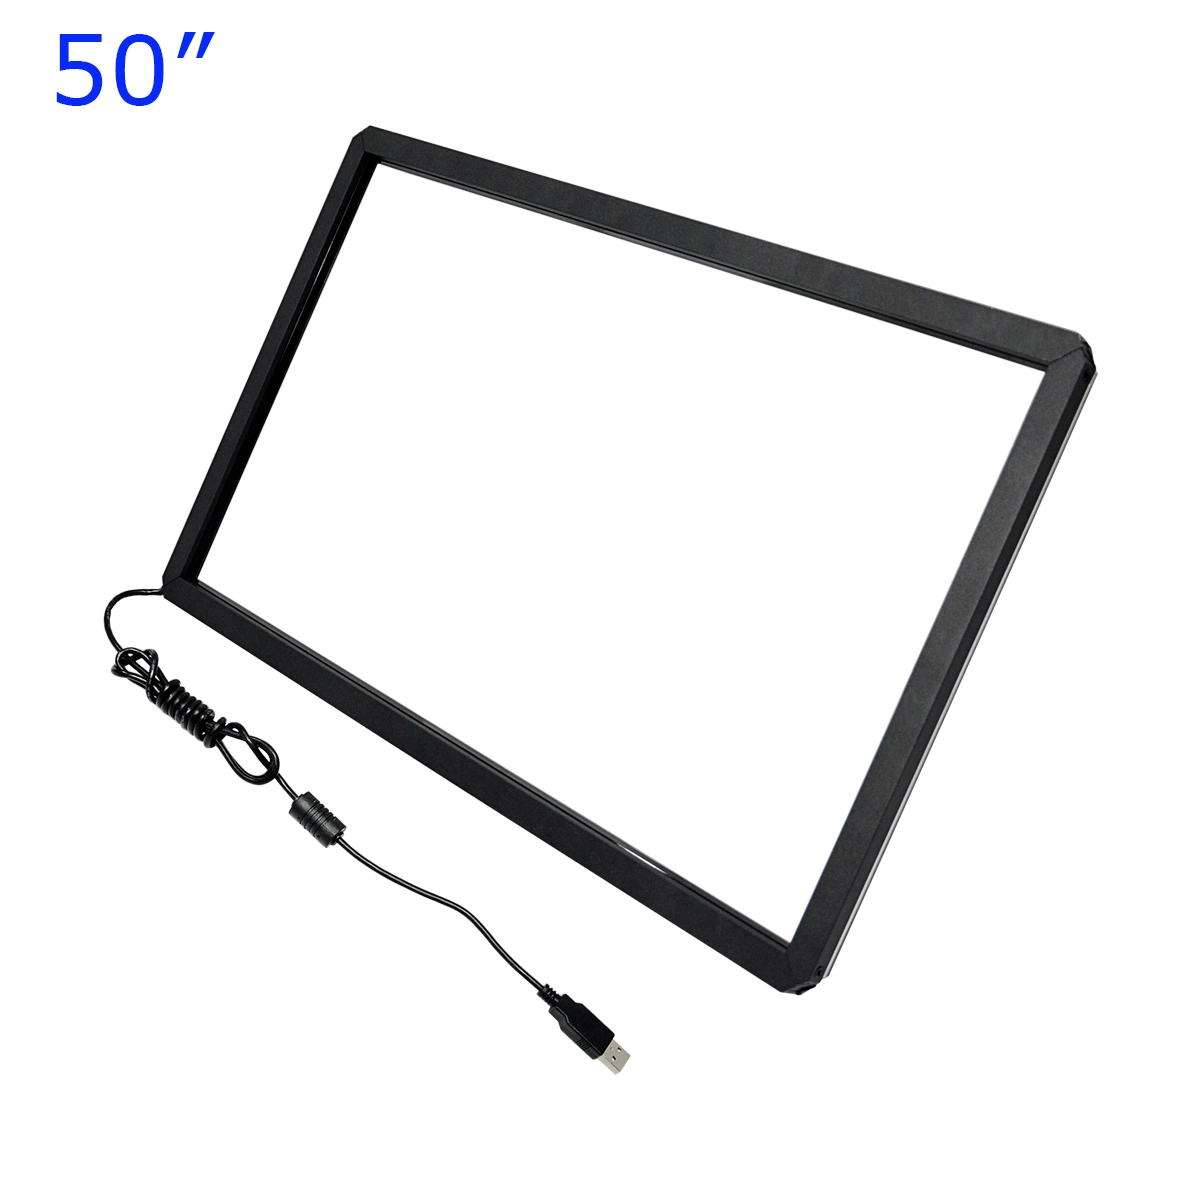 Cjtouch 50" Interactive Touch Screen Infrared Touch Frame